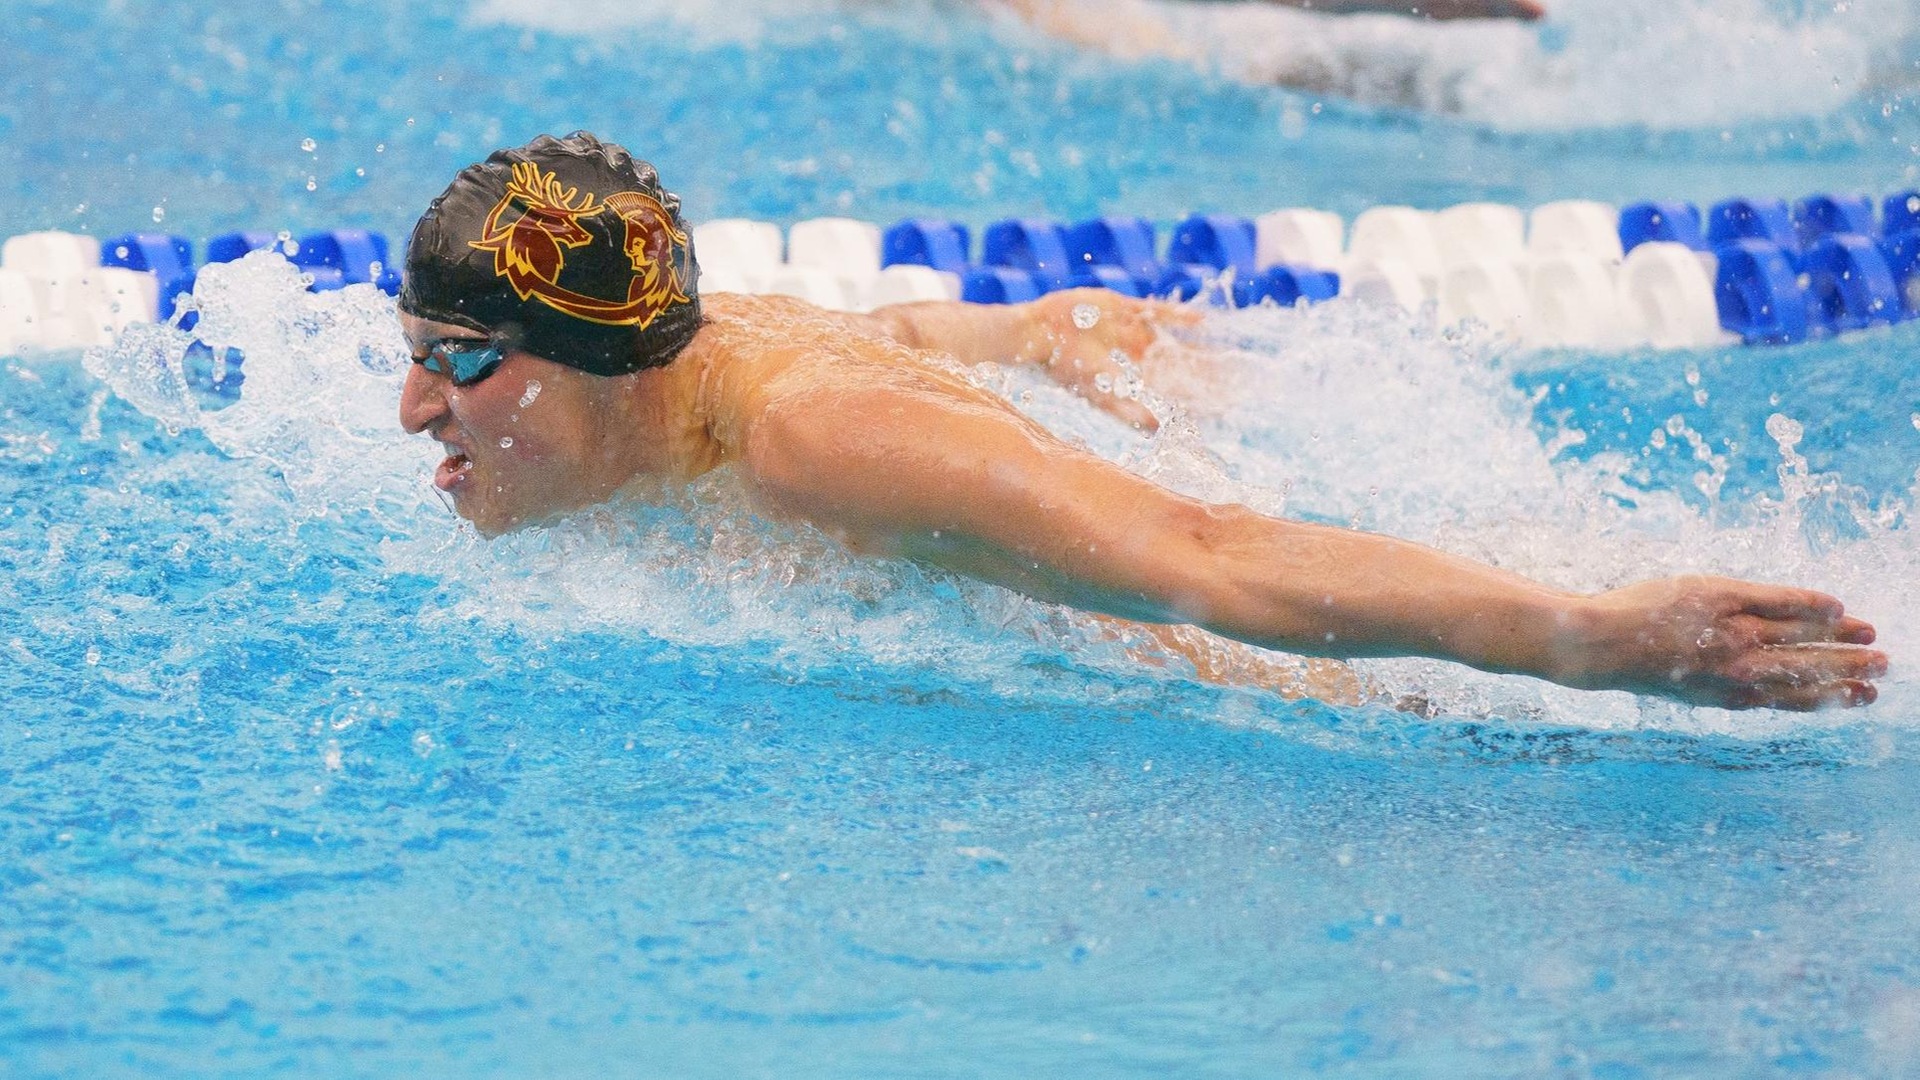 Frank Applebaum finished second with his fastest-ever 200 fly (photo by Josh Brown)